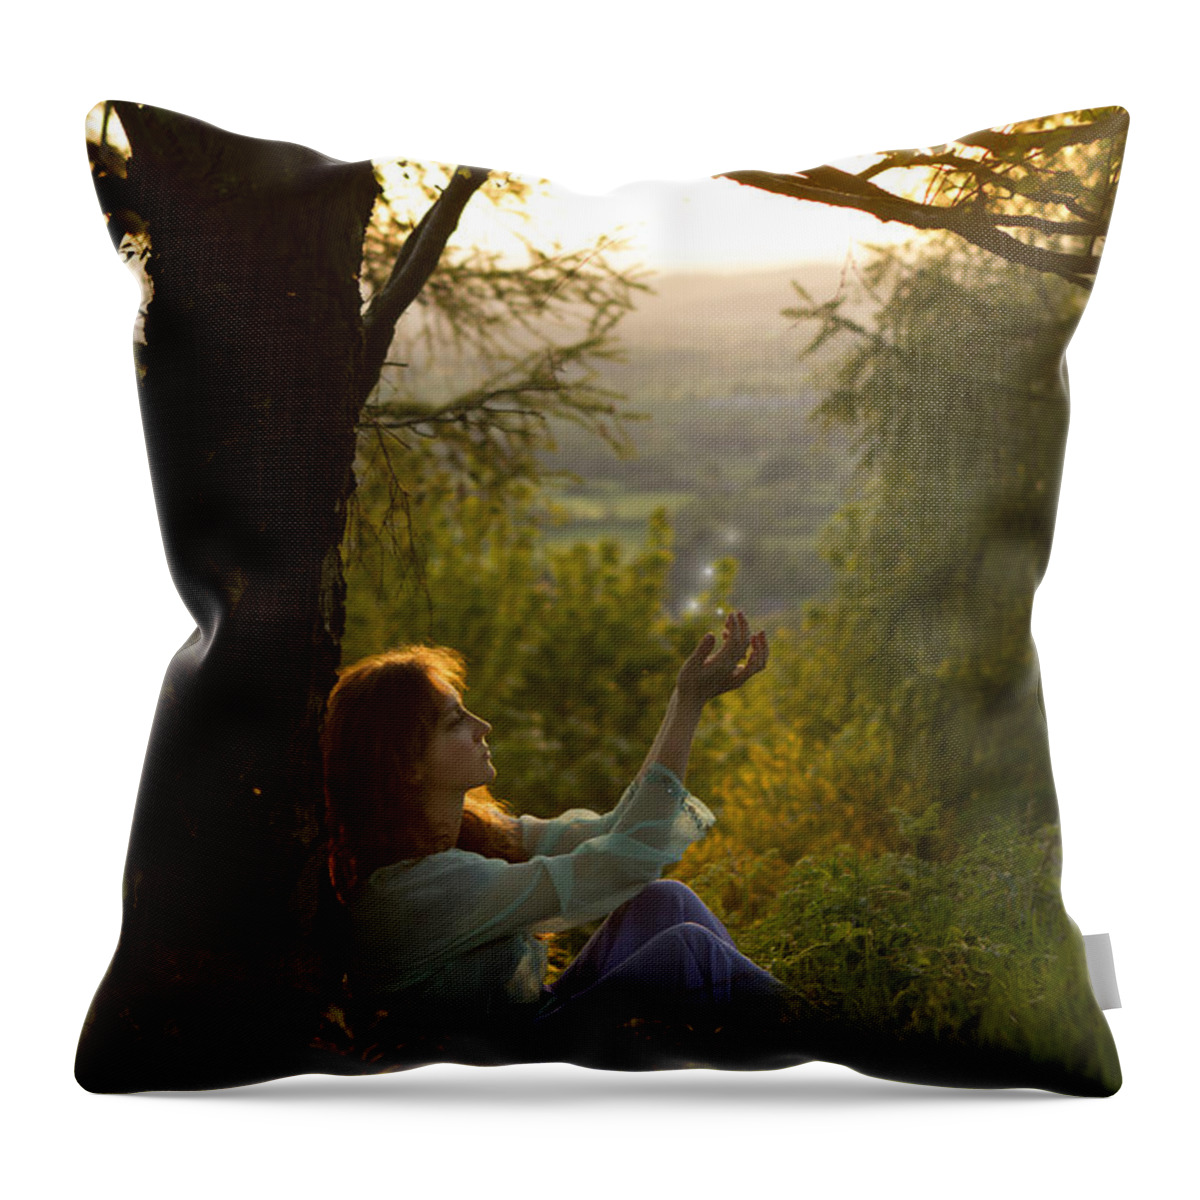 Woman Throw Pillow featuring the photograph The Shining Ones by Ang El